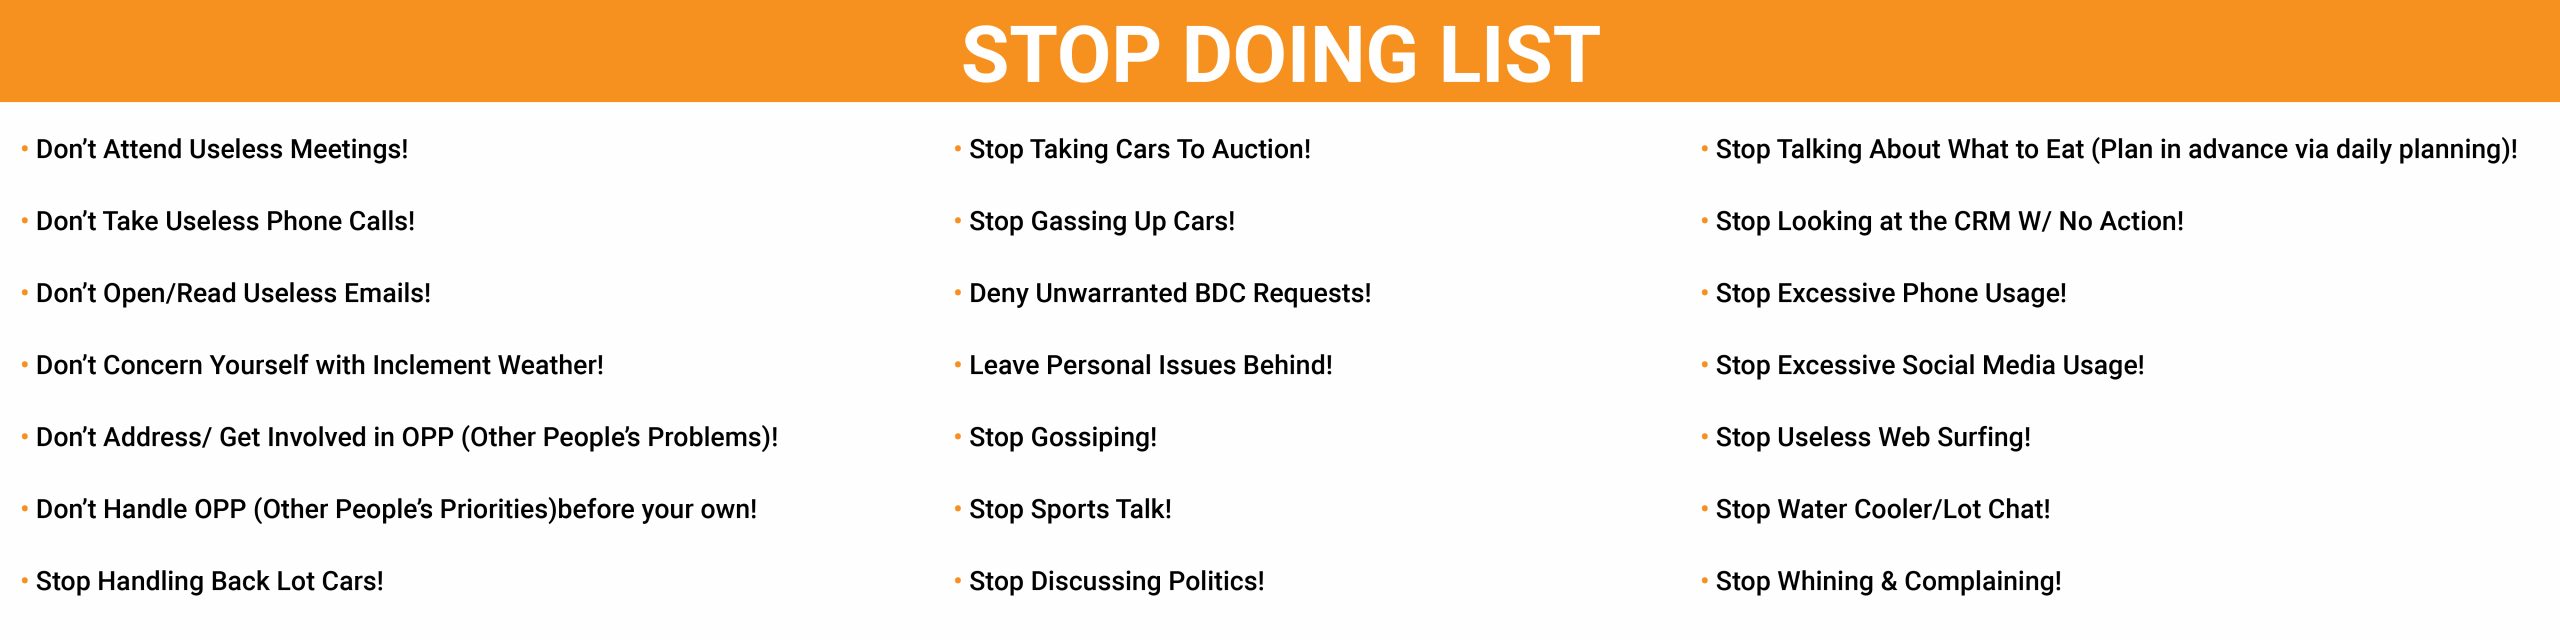 Stop Doing List  scaled